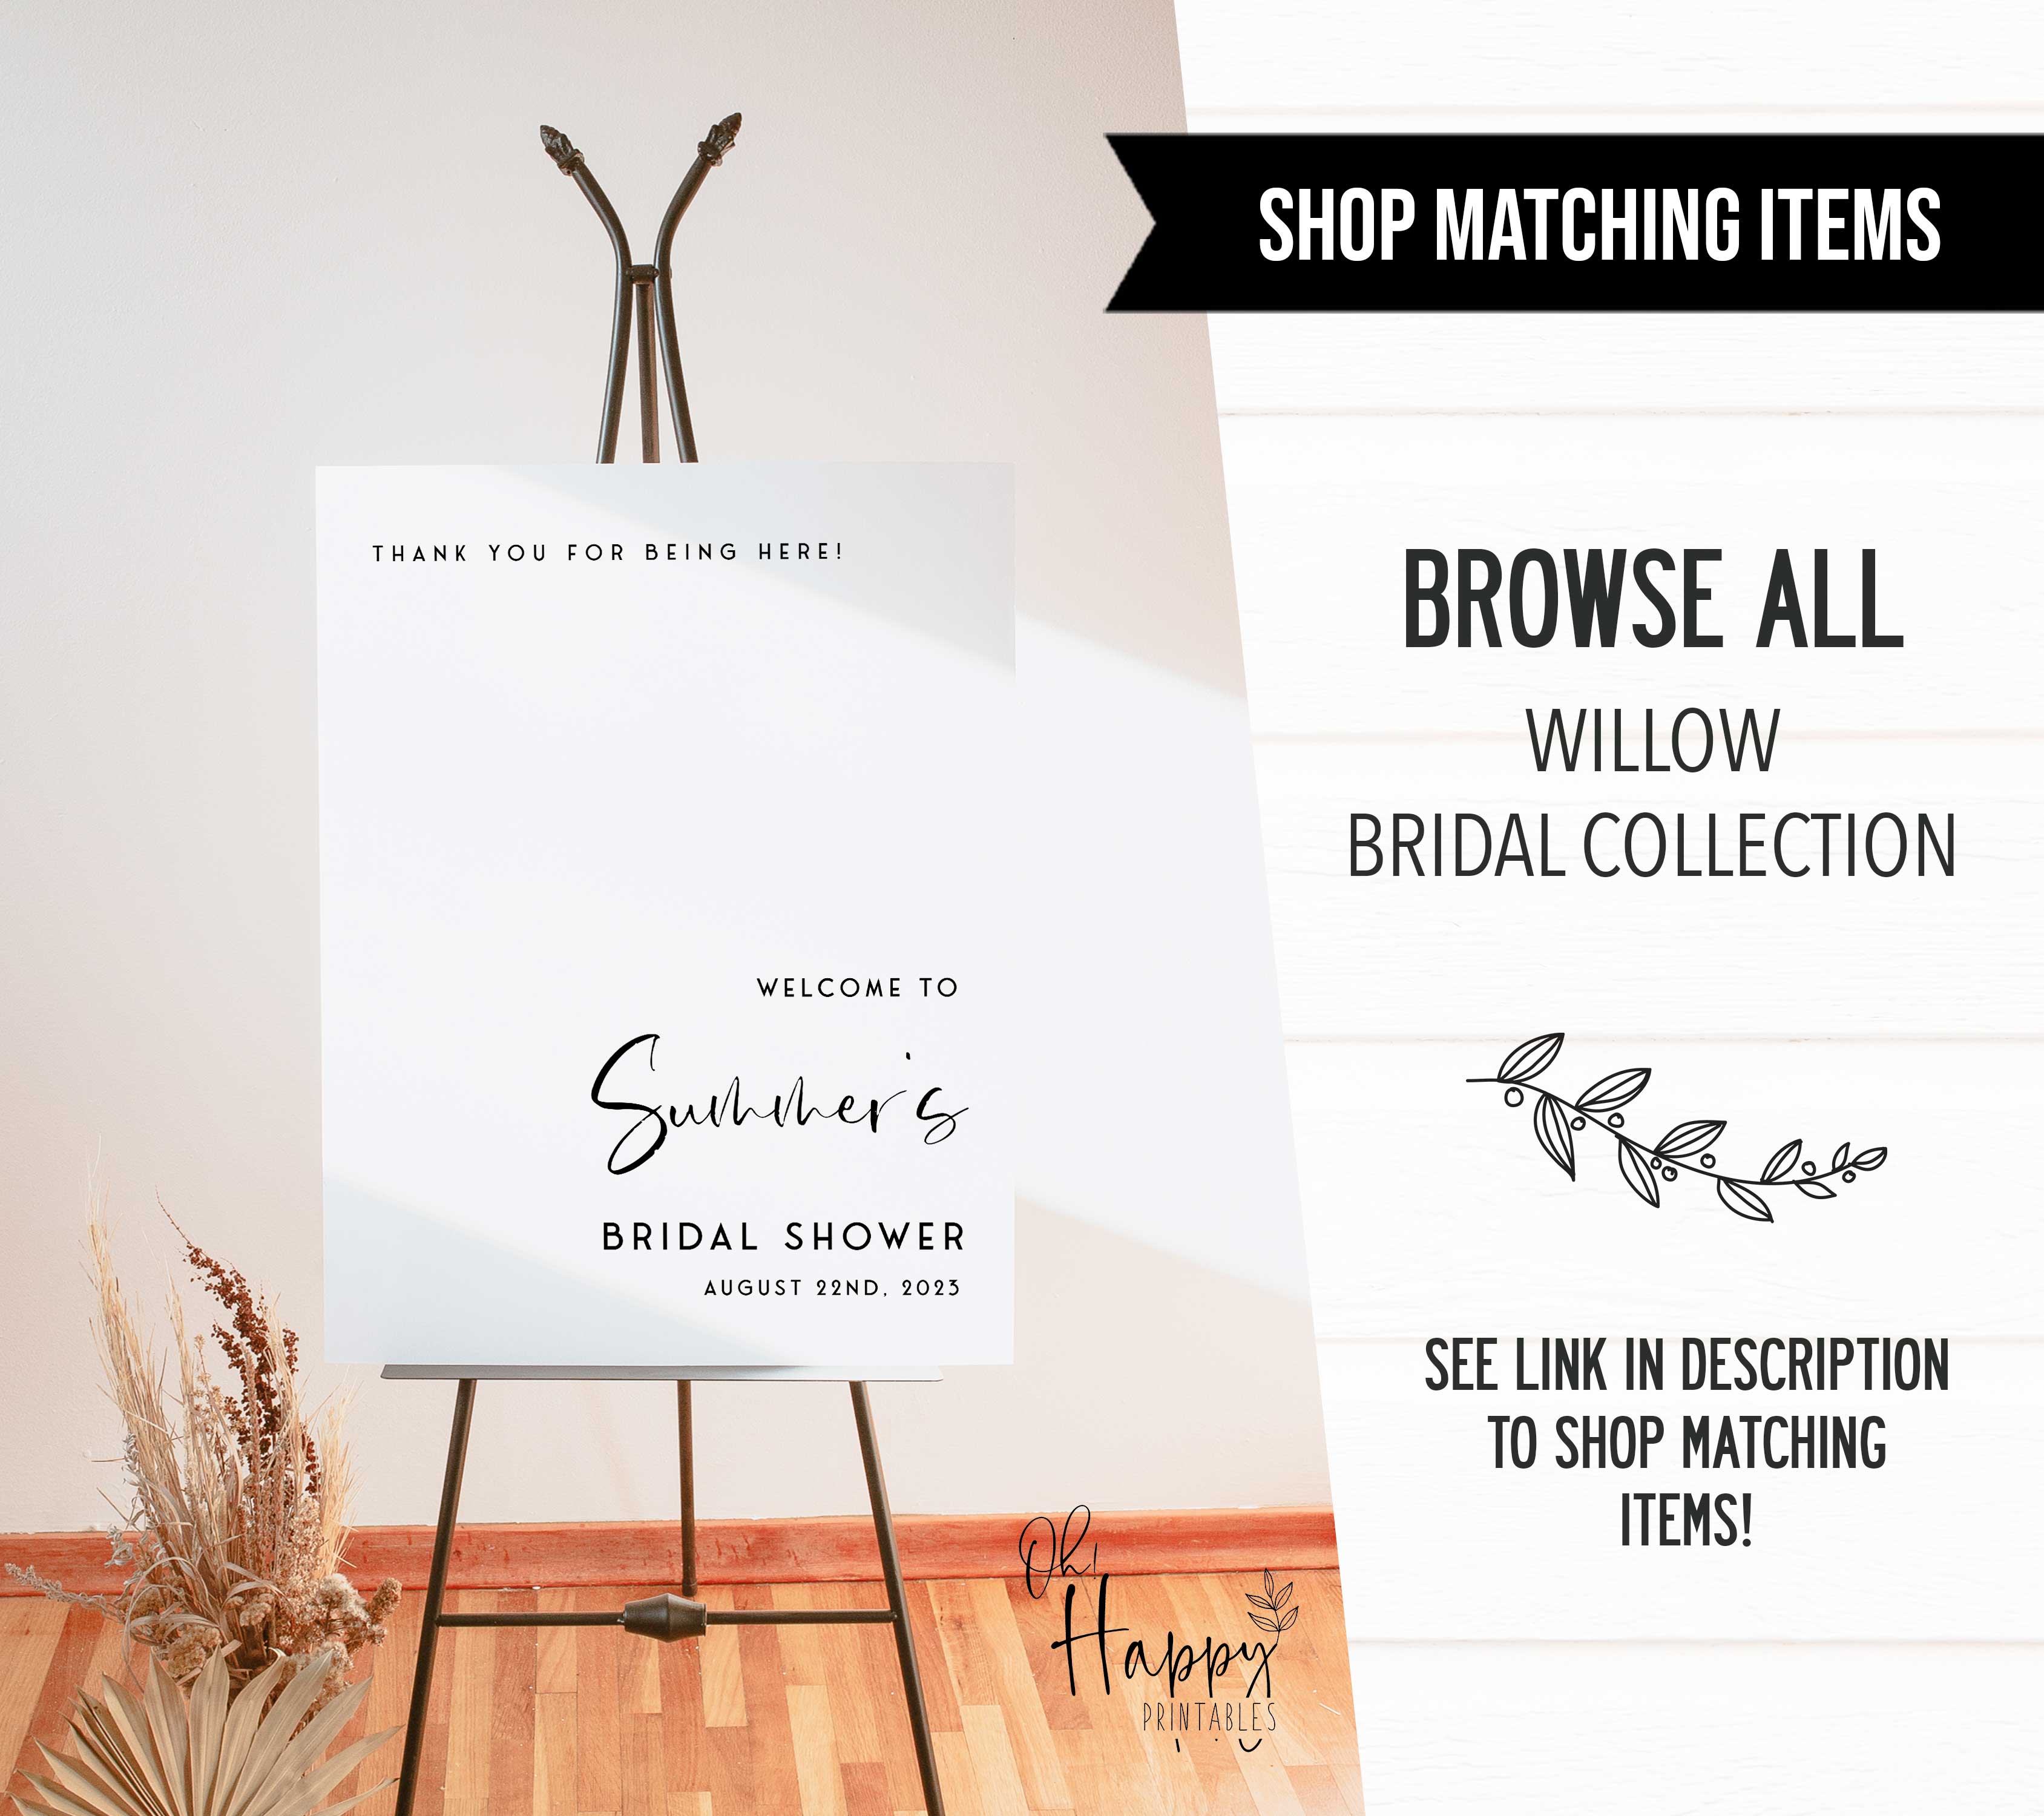 Fully editable and printable bridal shower invitation with a modern minimalist design. Perfect for a modern simple bridal shower themed party